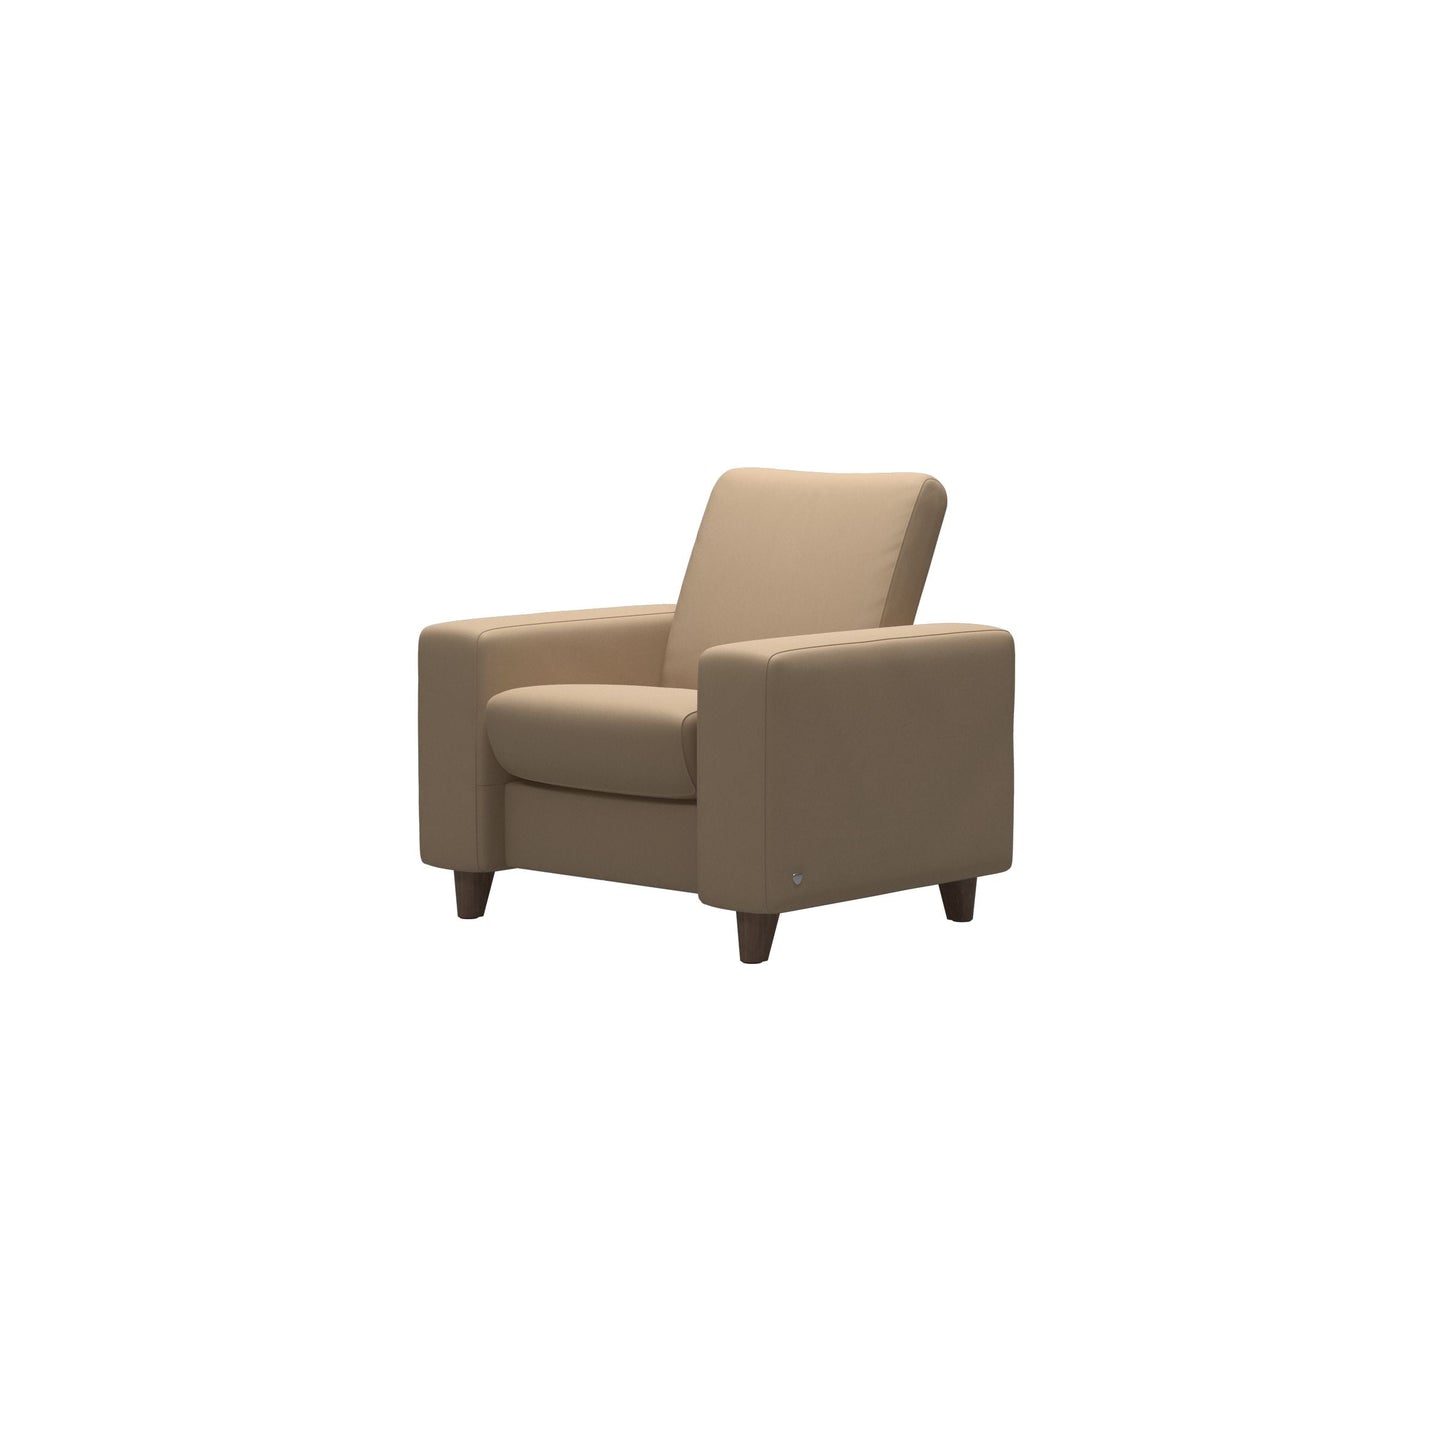 Stressless® Arion 19 A20 chair Low back